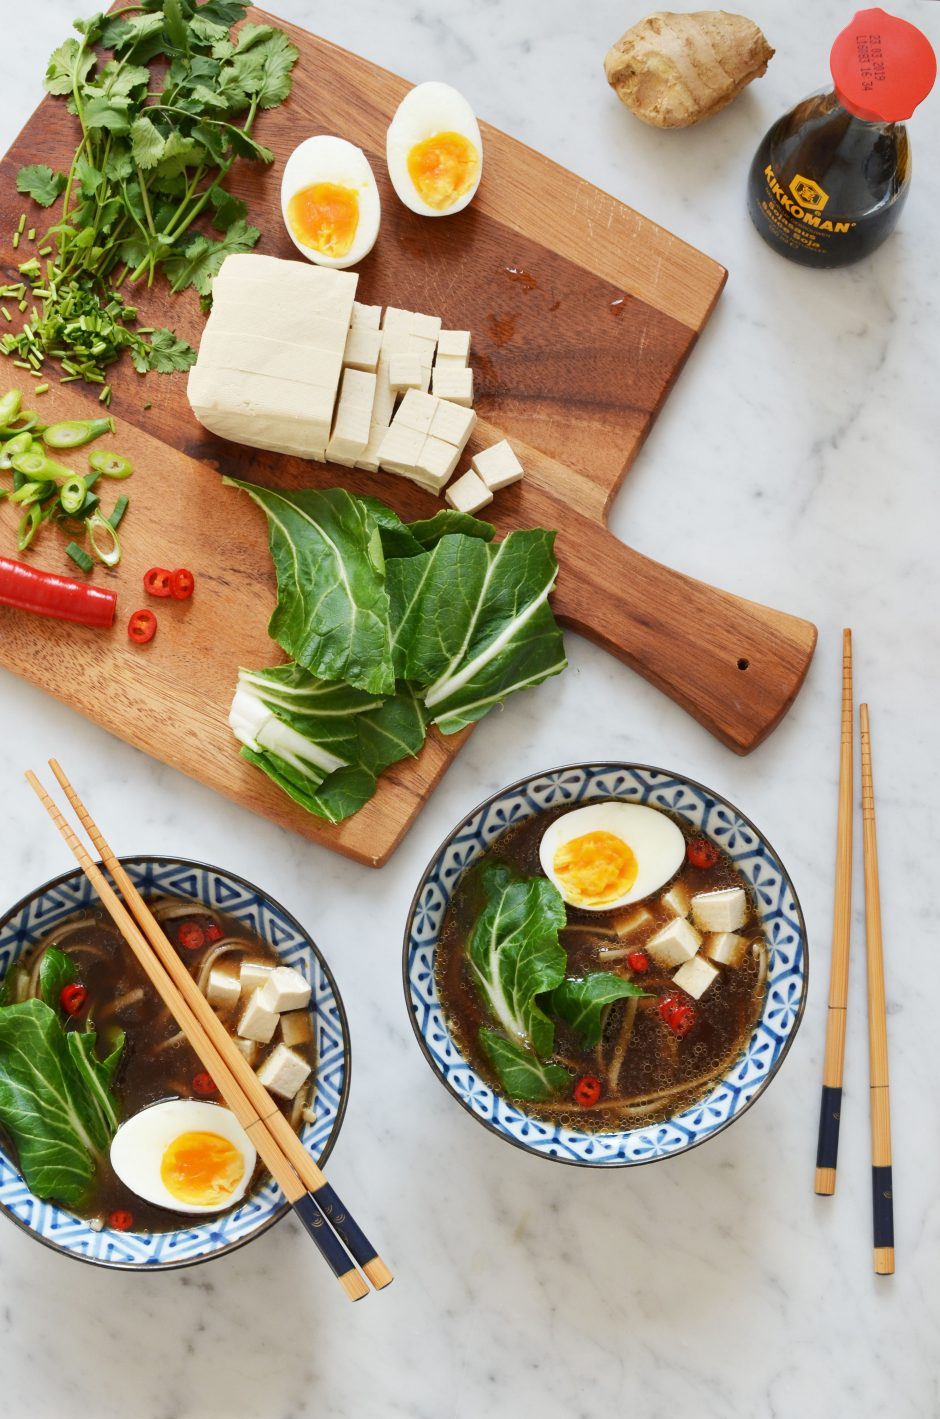 Recipe for spicy homemade ramen broth with all the toppings, including tofu, soft boiled eggs, fresh cilantro, red chili peppers, green onion, bok choy and buckwheat noodles. Gluten free!